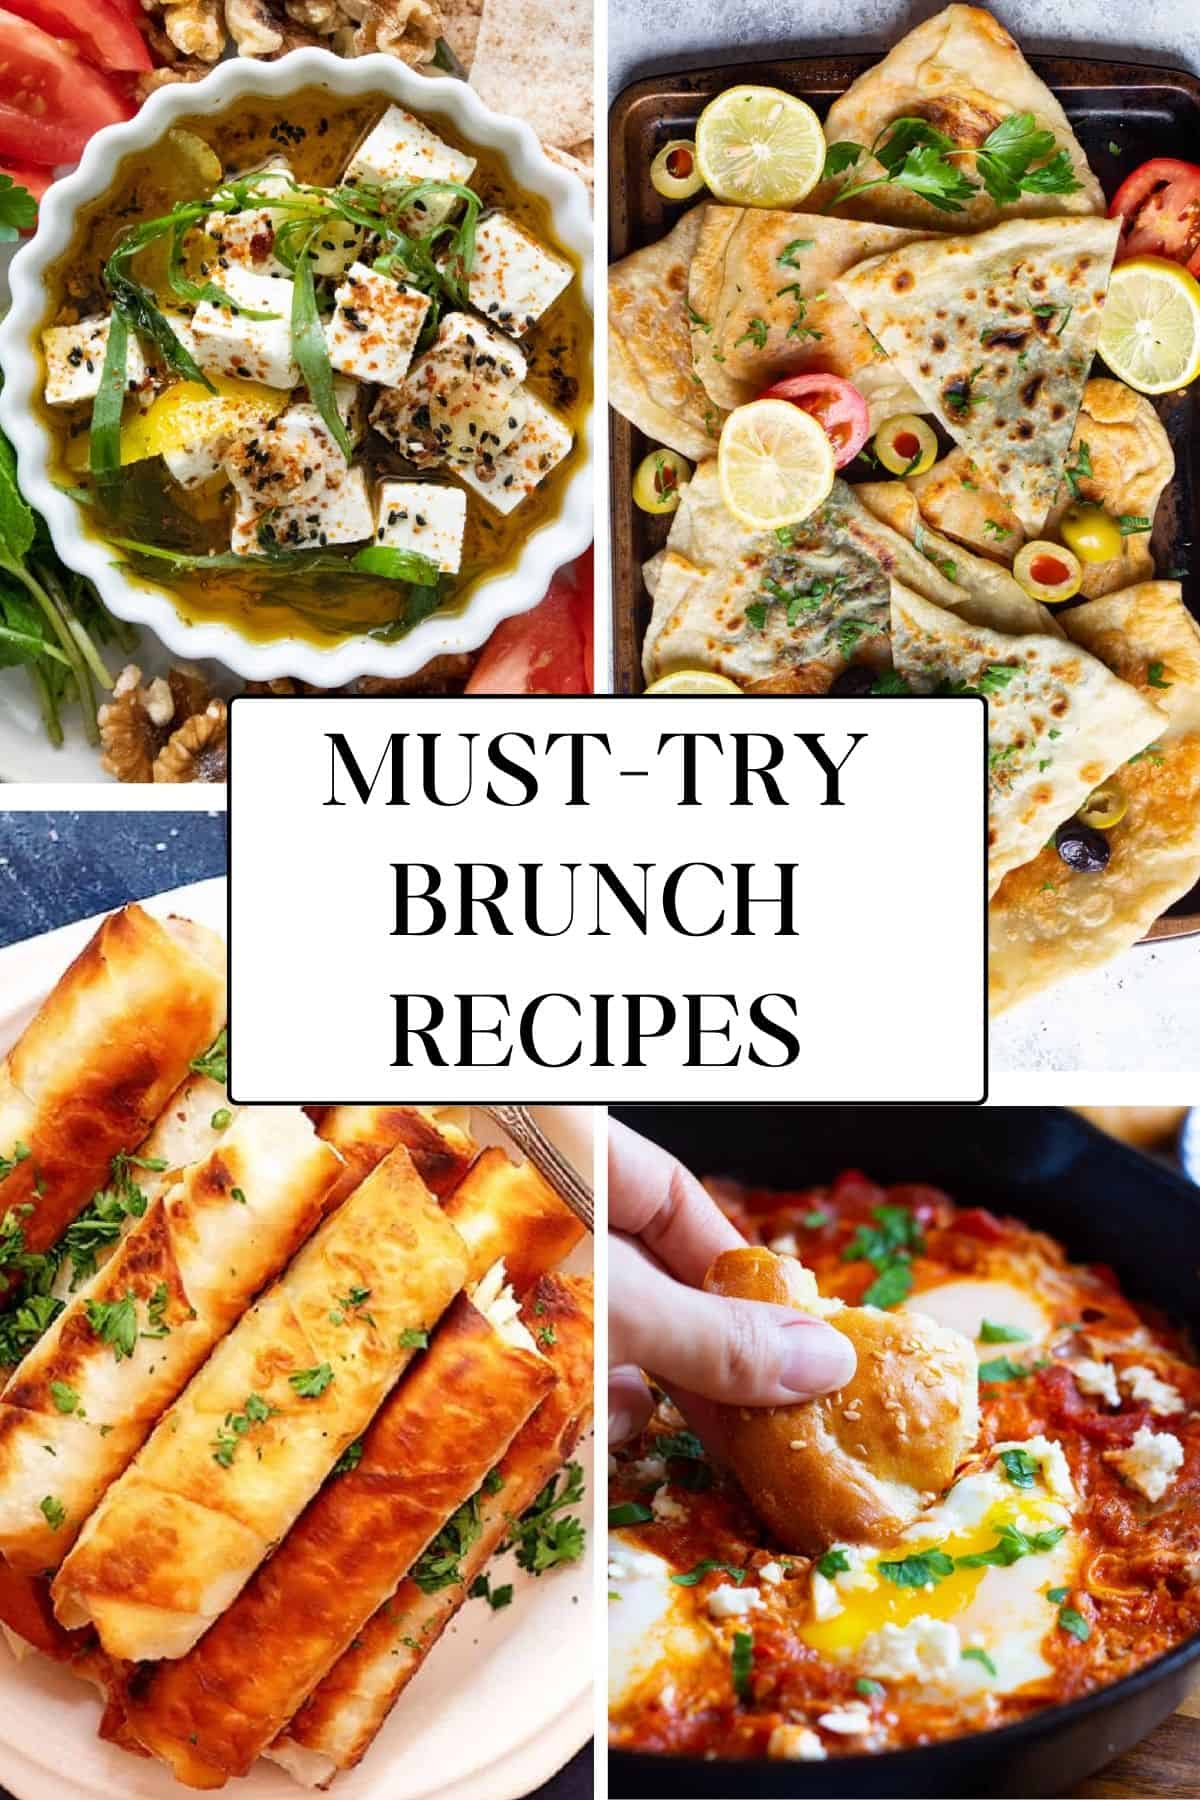 Here is a collection of best brunch recipe ideas for your next gathering. I have included sweet and savory brunch recipes that are easy and use wholesome ingredients. These brunch ideas are simple and make the perfect spread that anyone will love. 